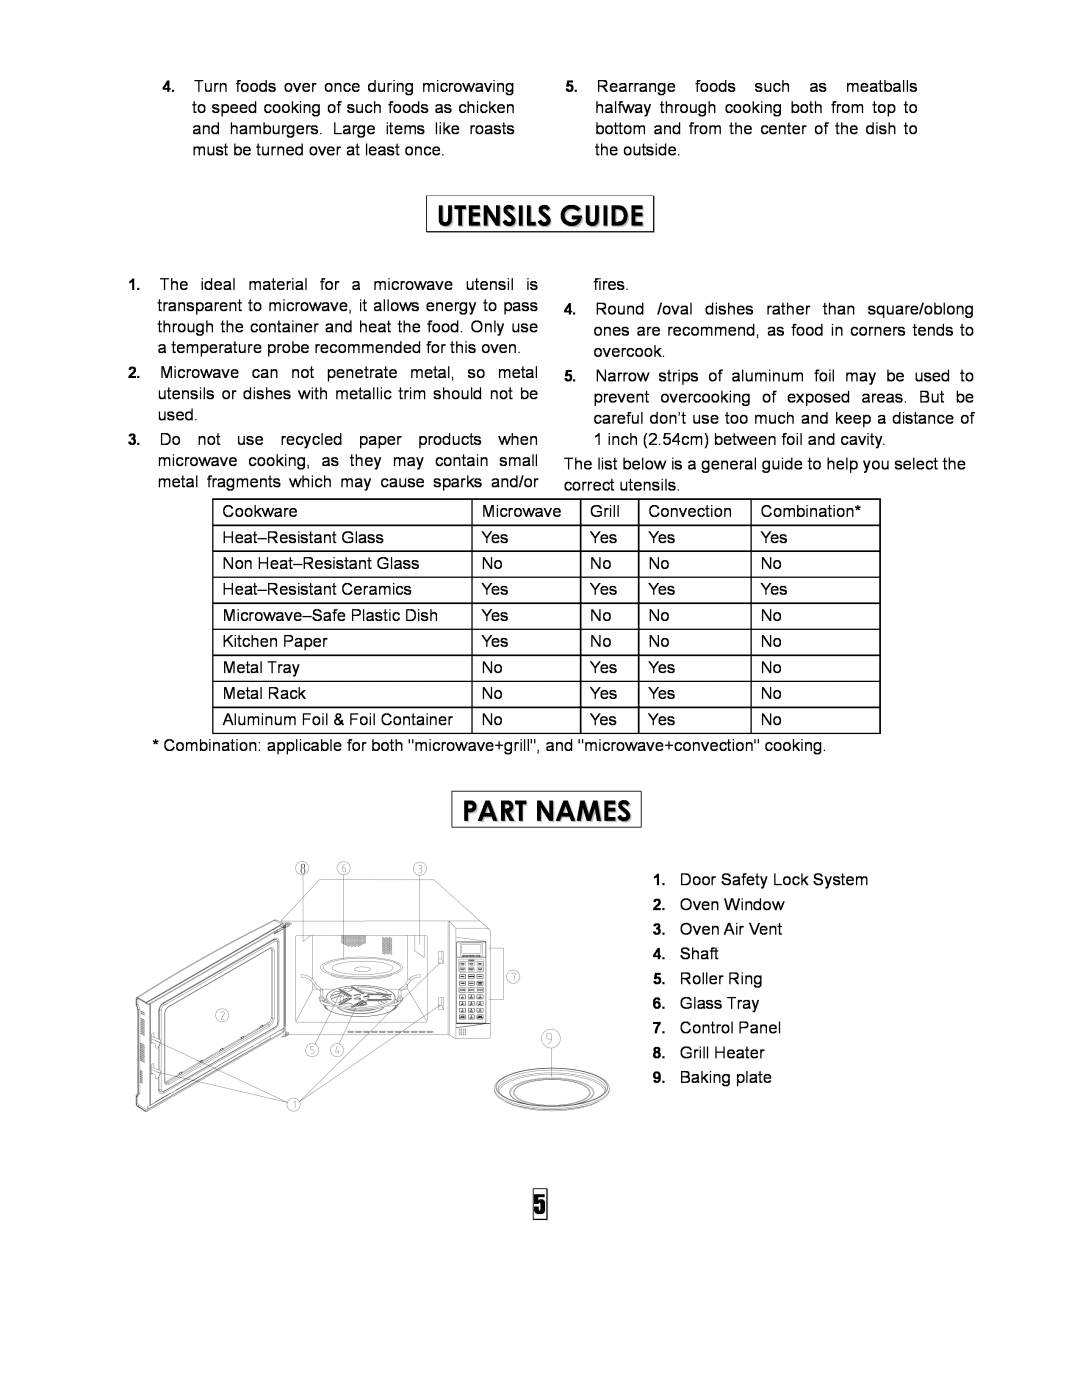 Curtis SMW5500 owner manual Utensils Guide, Part Names 